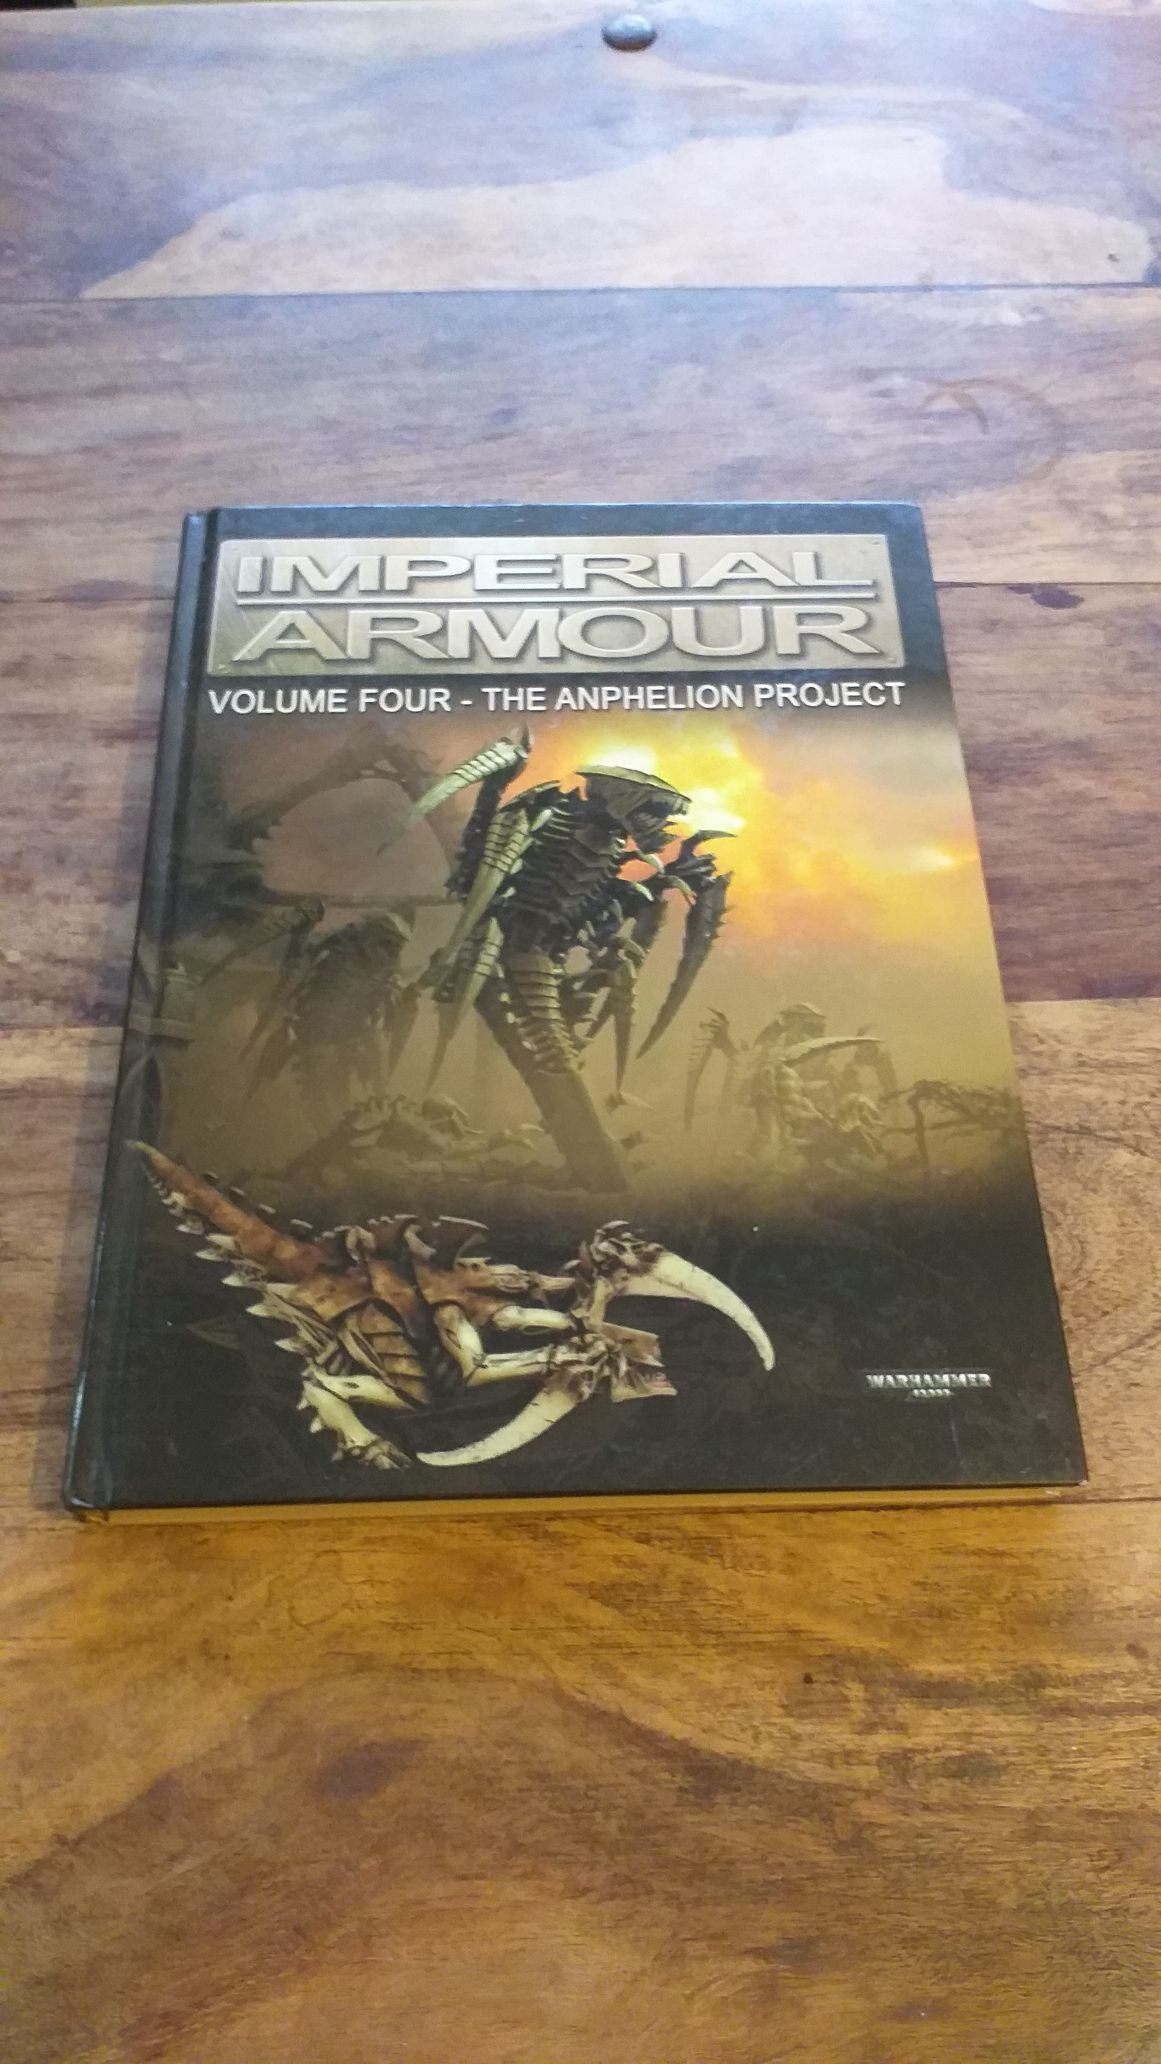 Imperial Armour Volume Four - The Anphelion Project Warhammer 40,000 Forgeworld Games Workshop